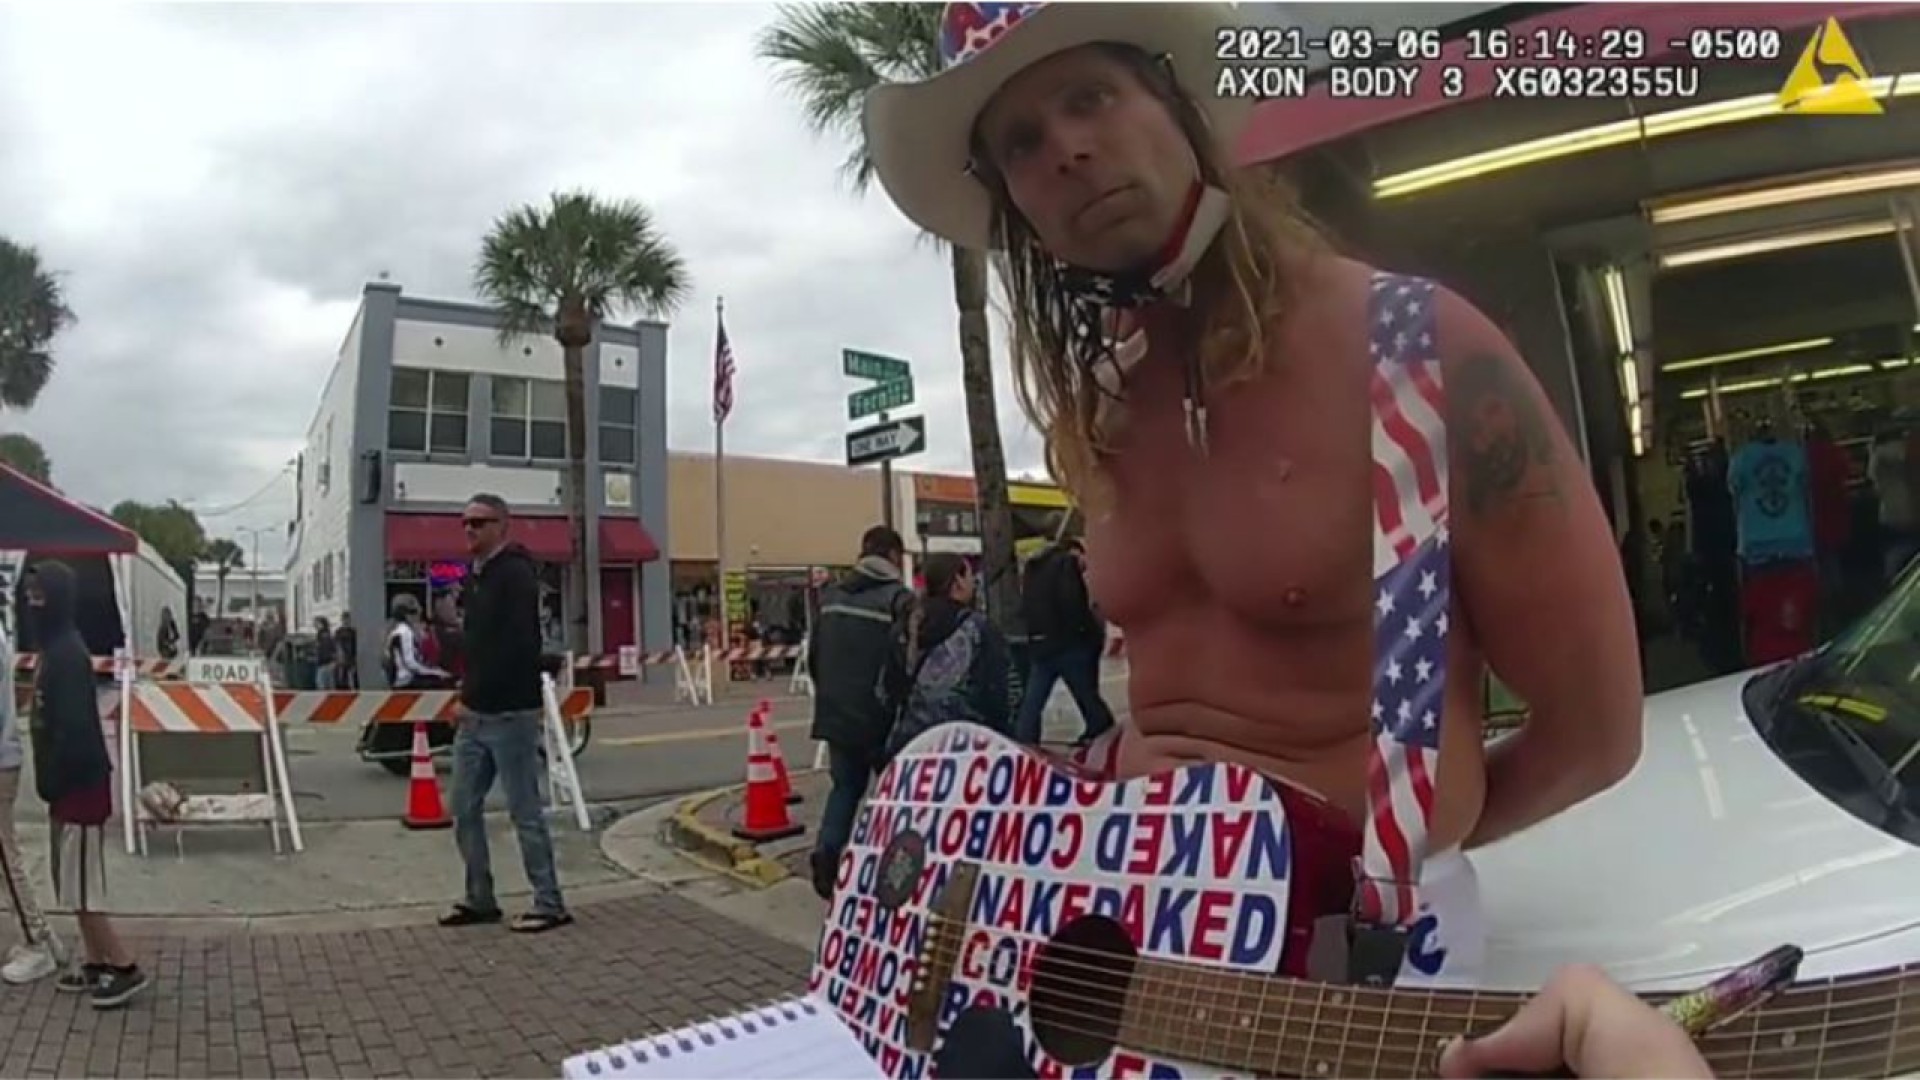 Daytona Beach agrees to $90,000 settlement with Naked Cowboy after Bike Week arrest